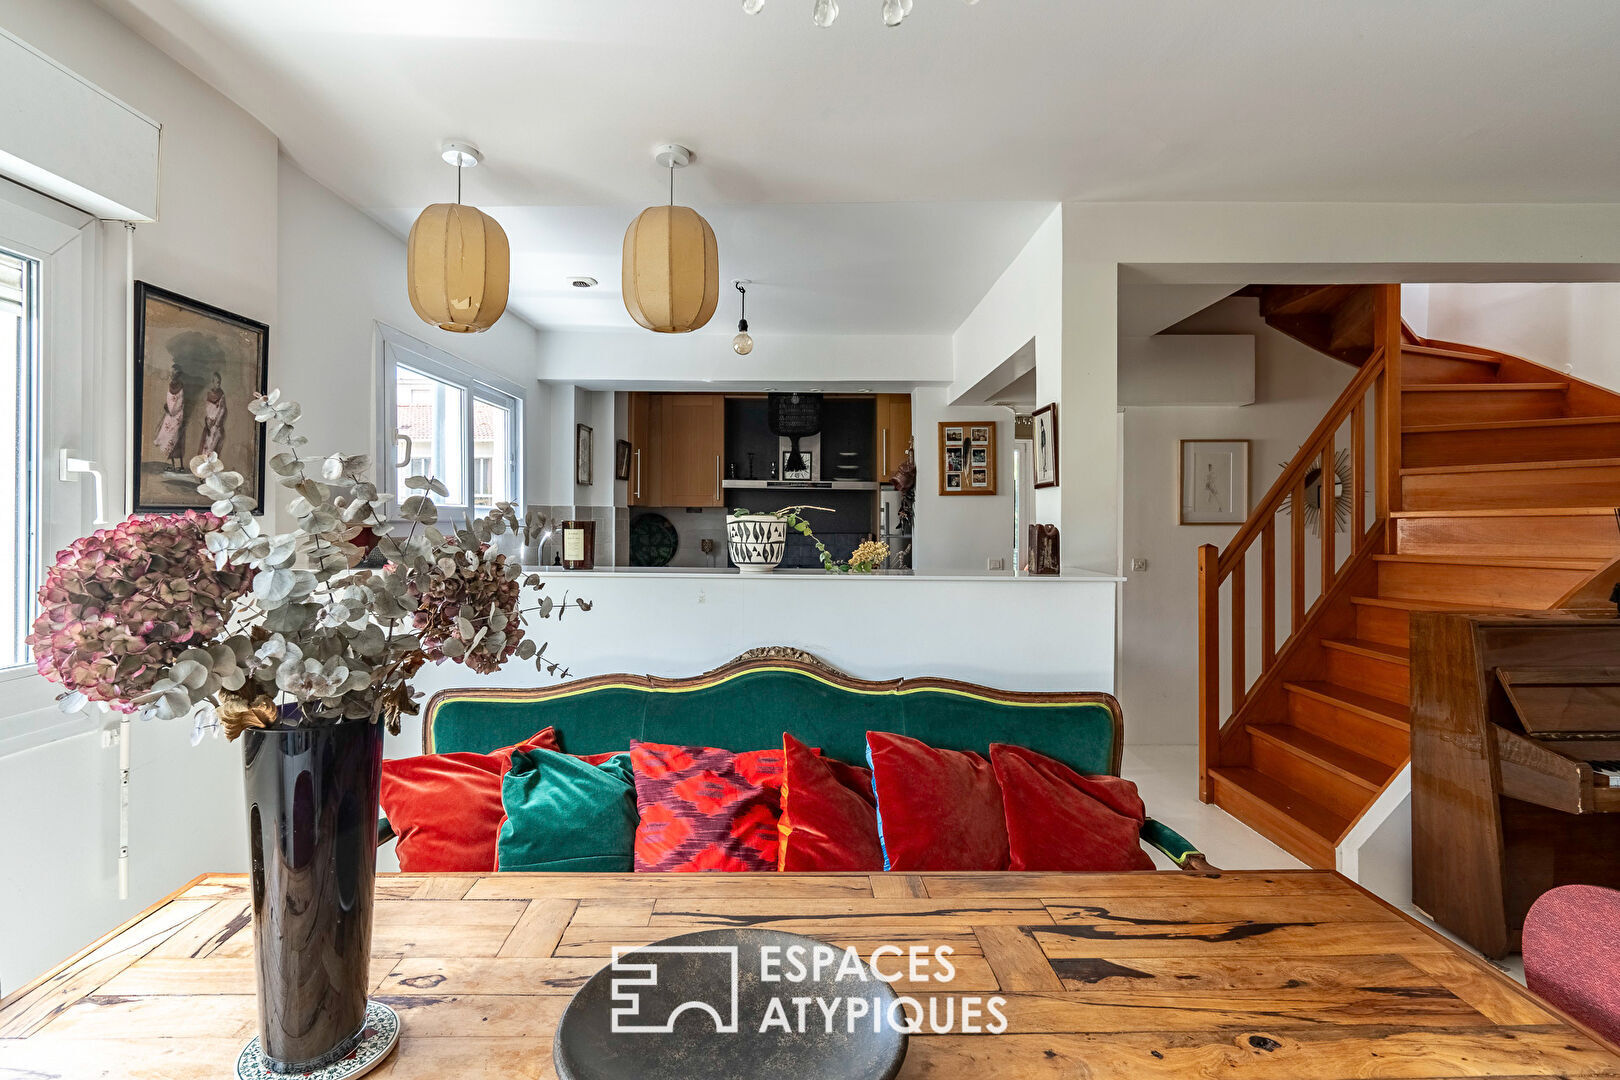 Town house with independent studio near Michelet high school